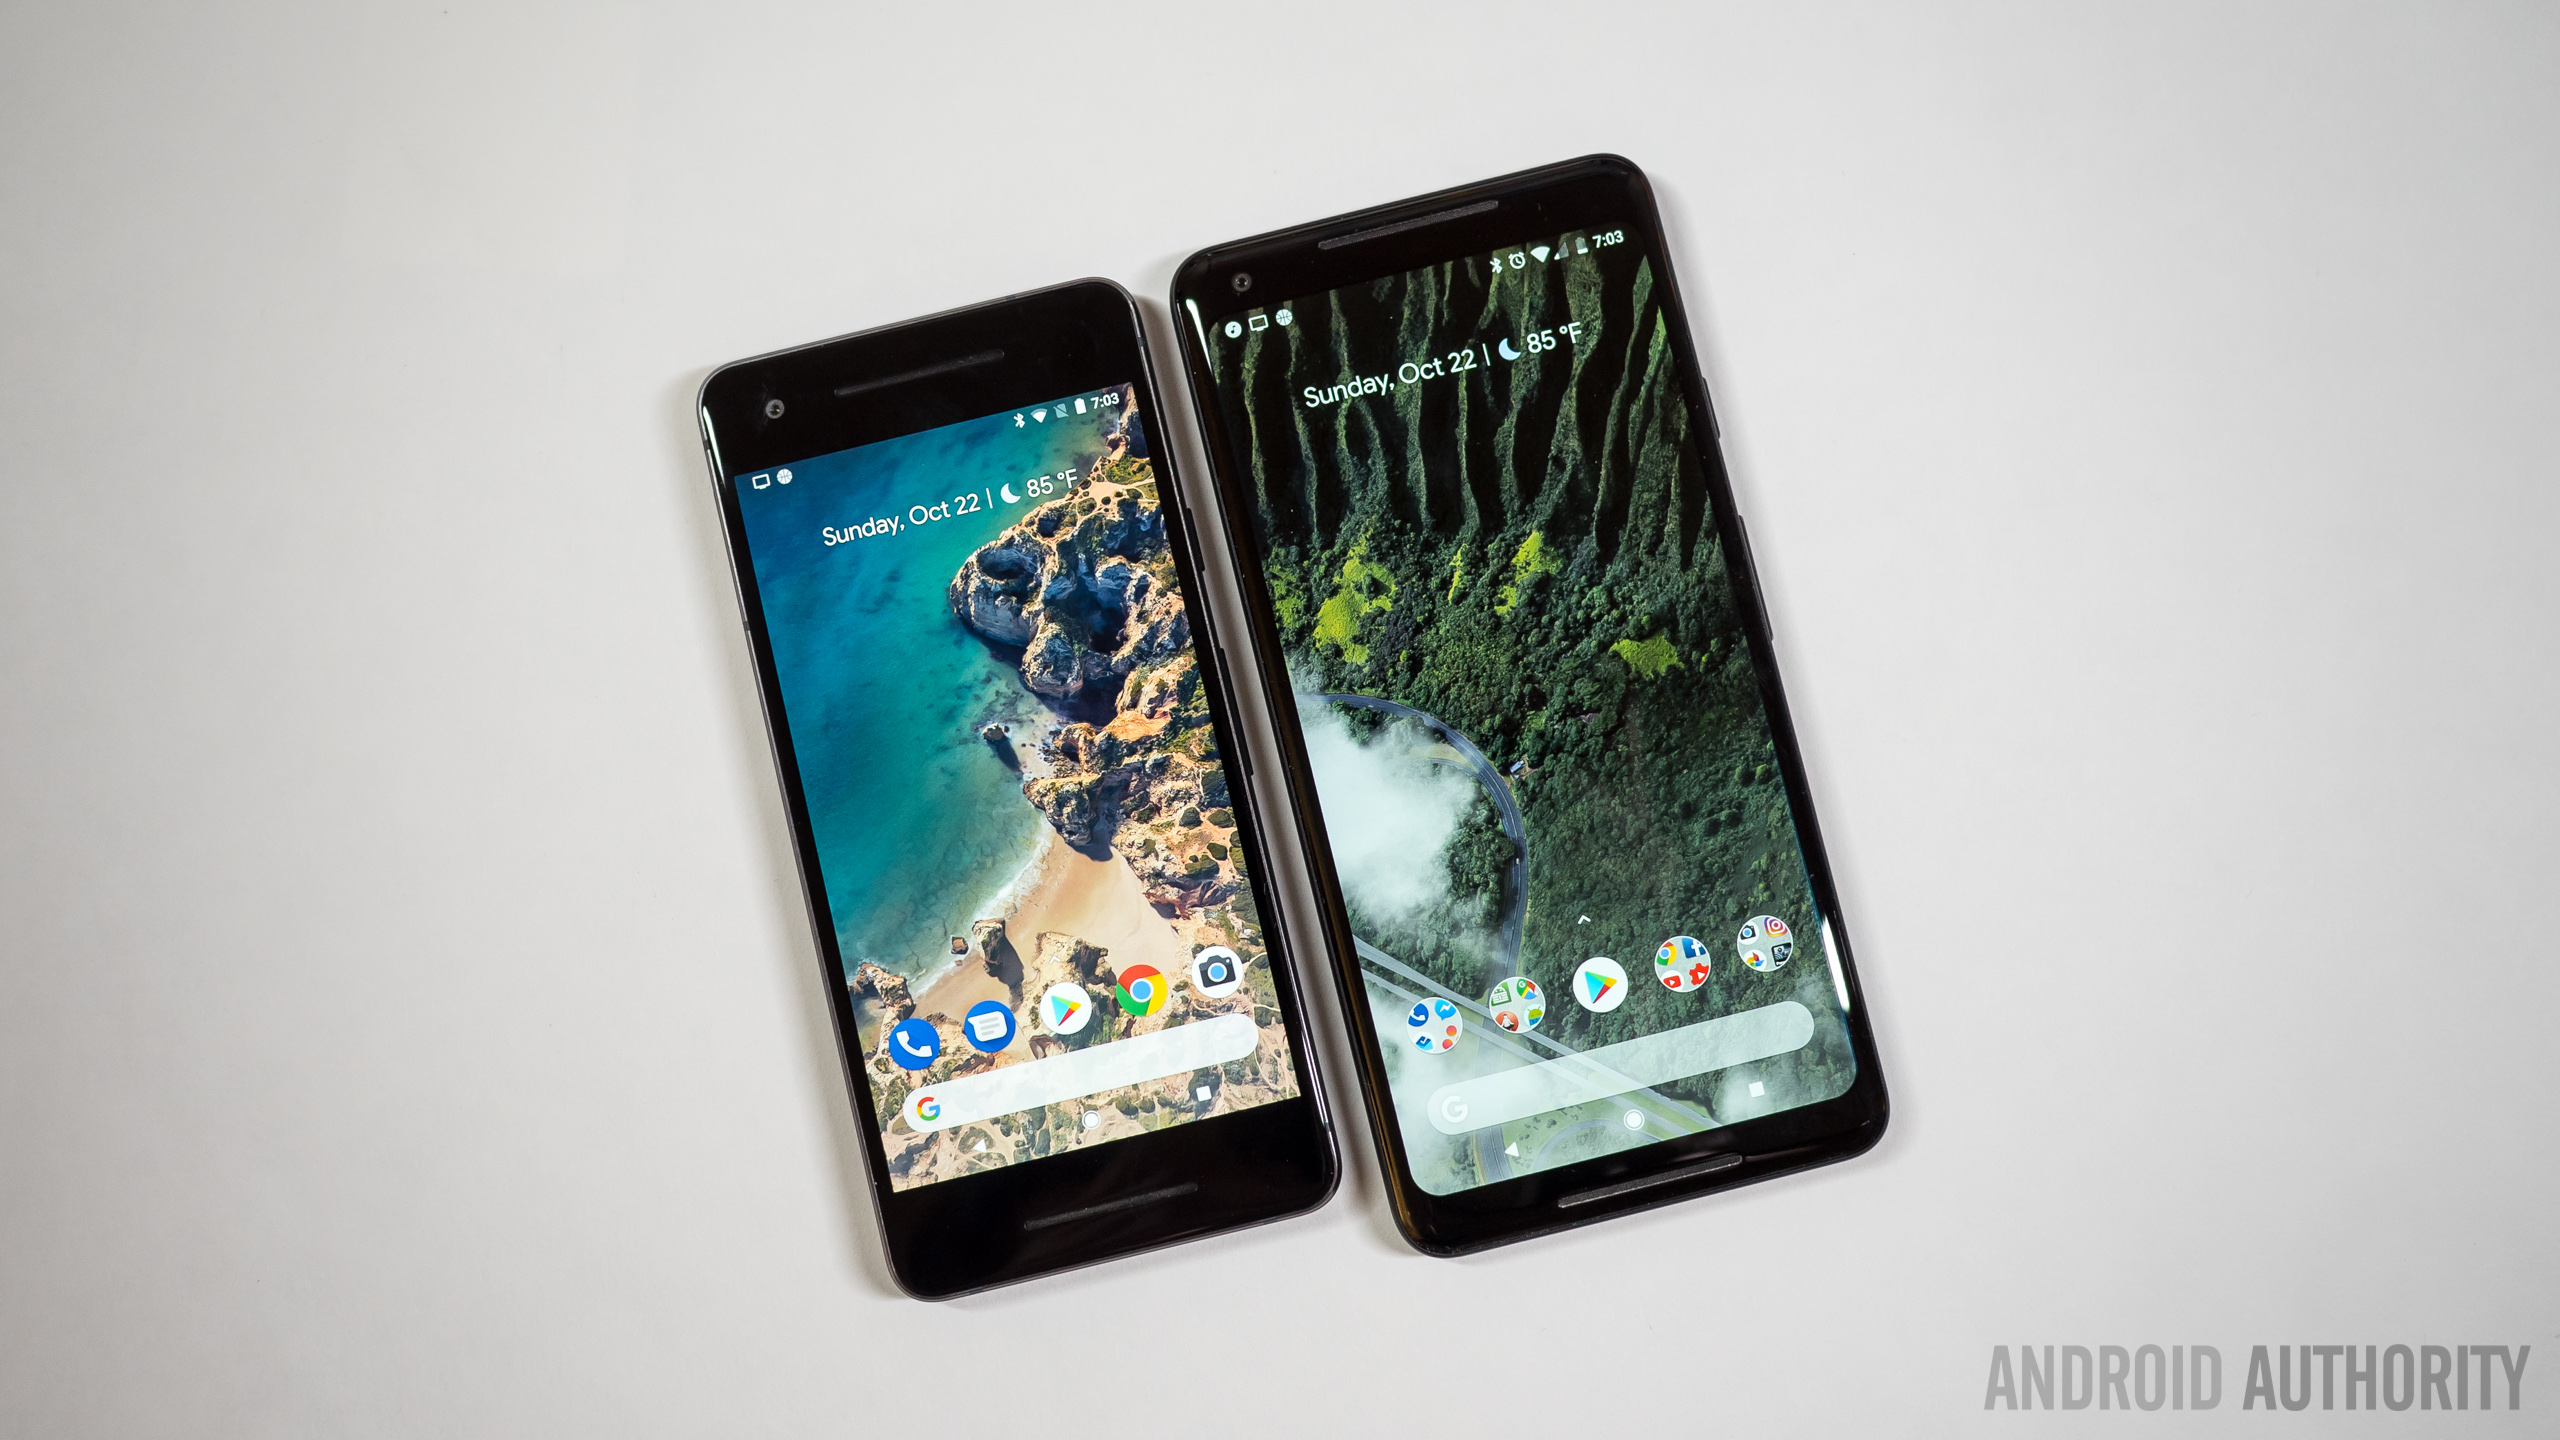 Pixel 2 and Pixel 2 XL side by side